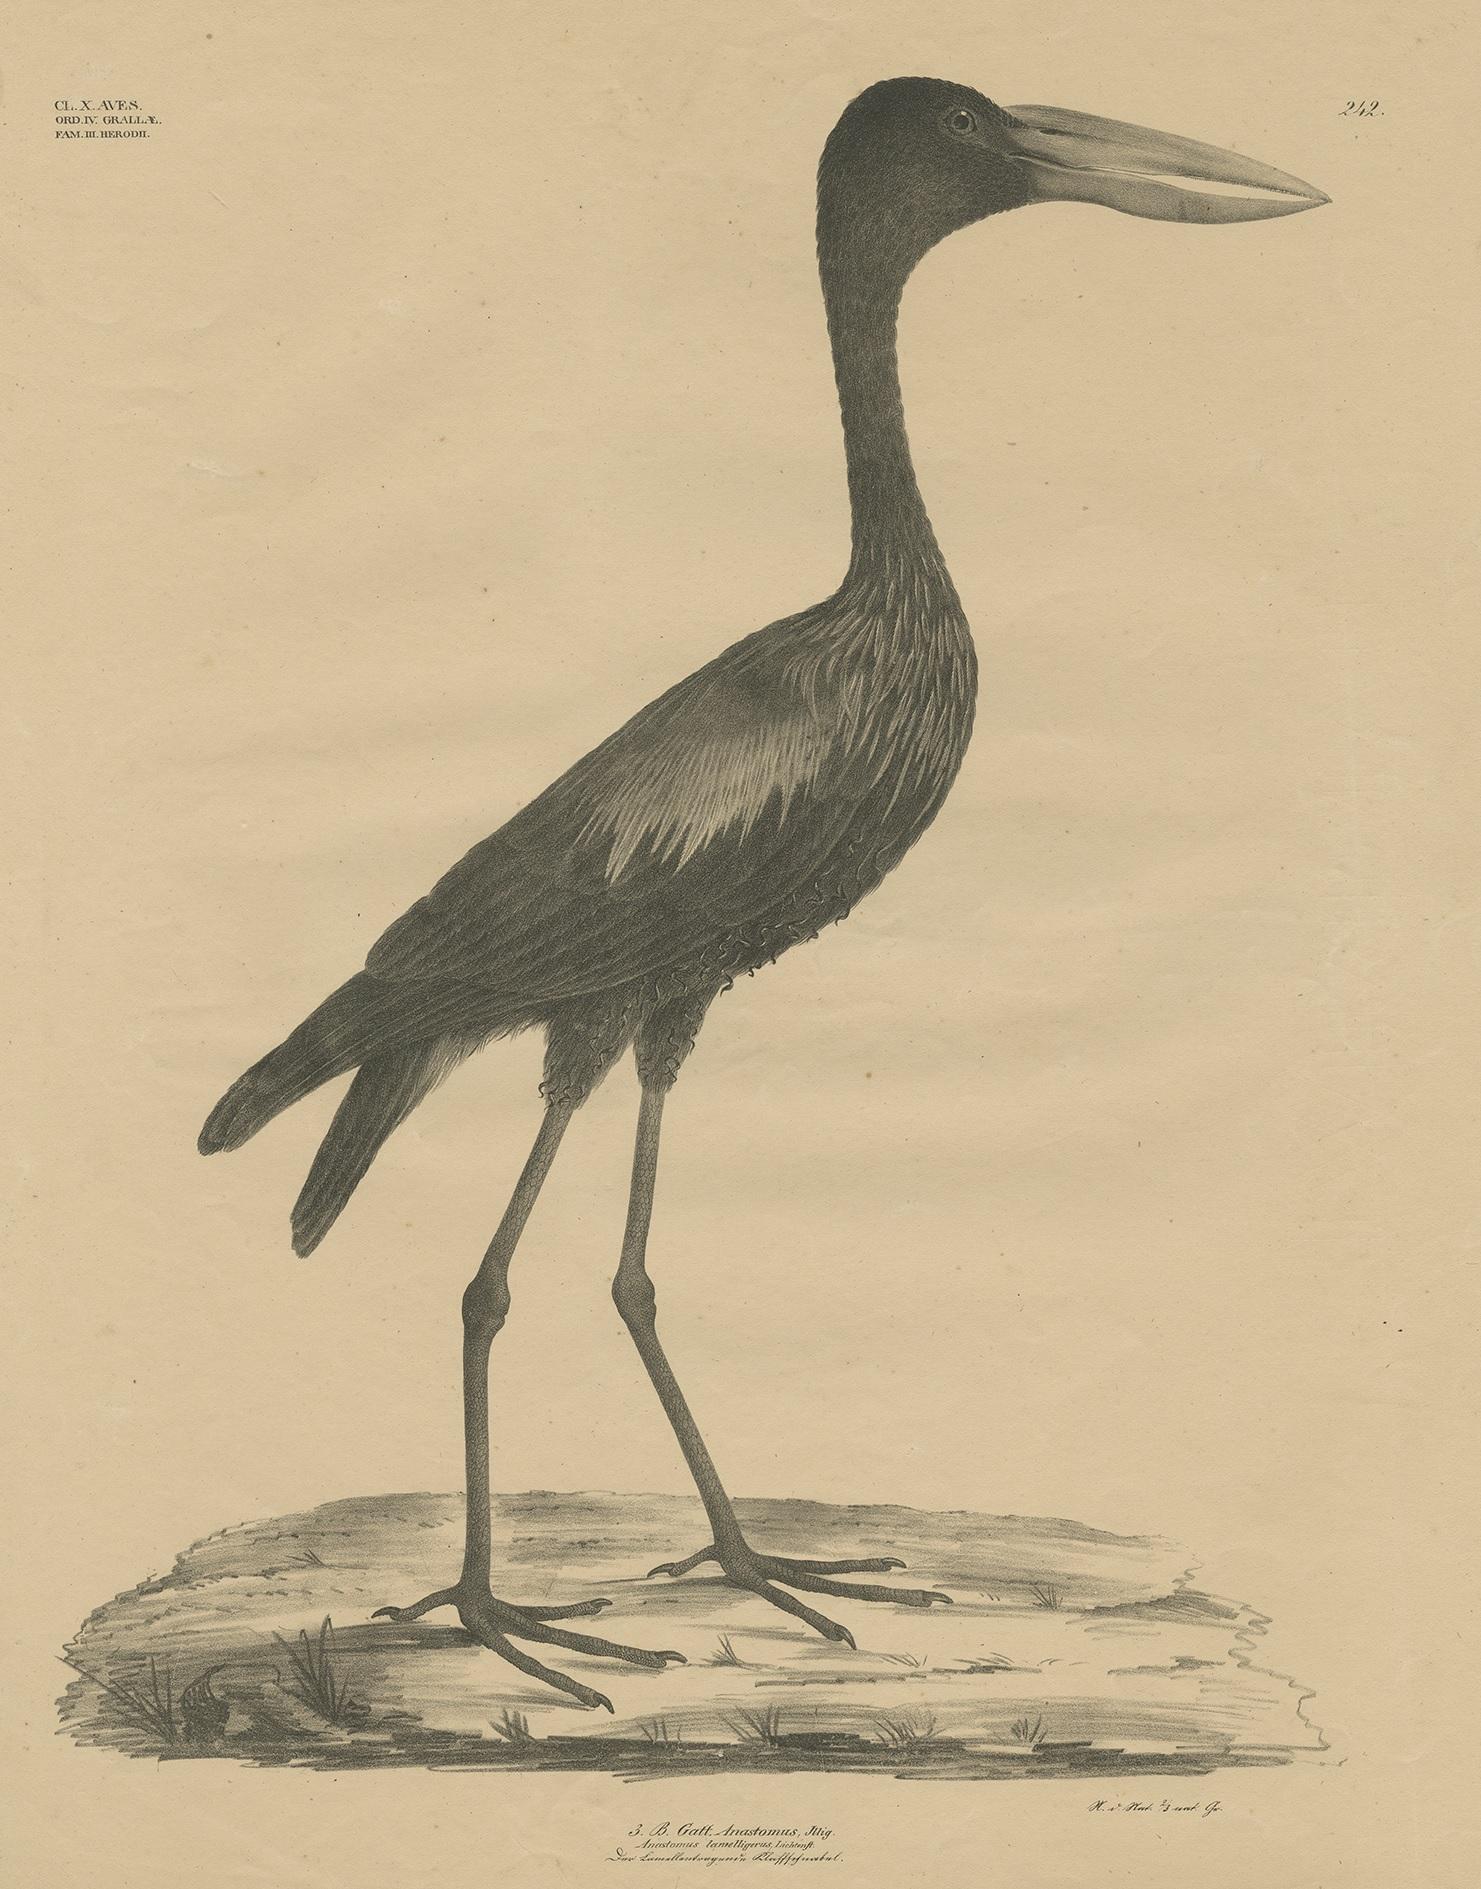 Antique bird print titled 'Gatt Anostomus'. Large lithograph of the African openbill, a species of stork in the family Ciconiidae. It is native to large parts of Sub-Saharan Africa.

This print originates from 'Naturalist Atlas' by Georg August